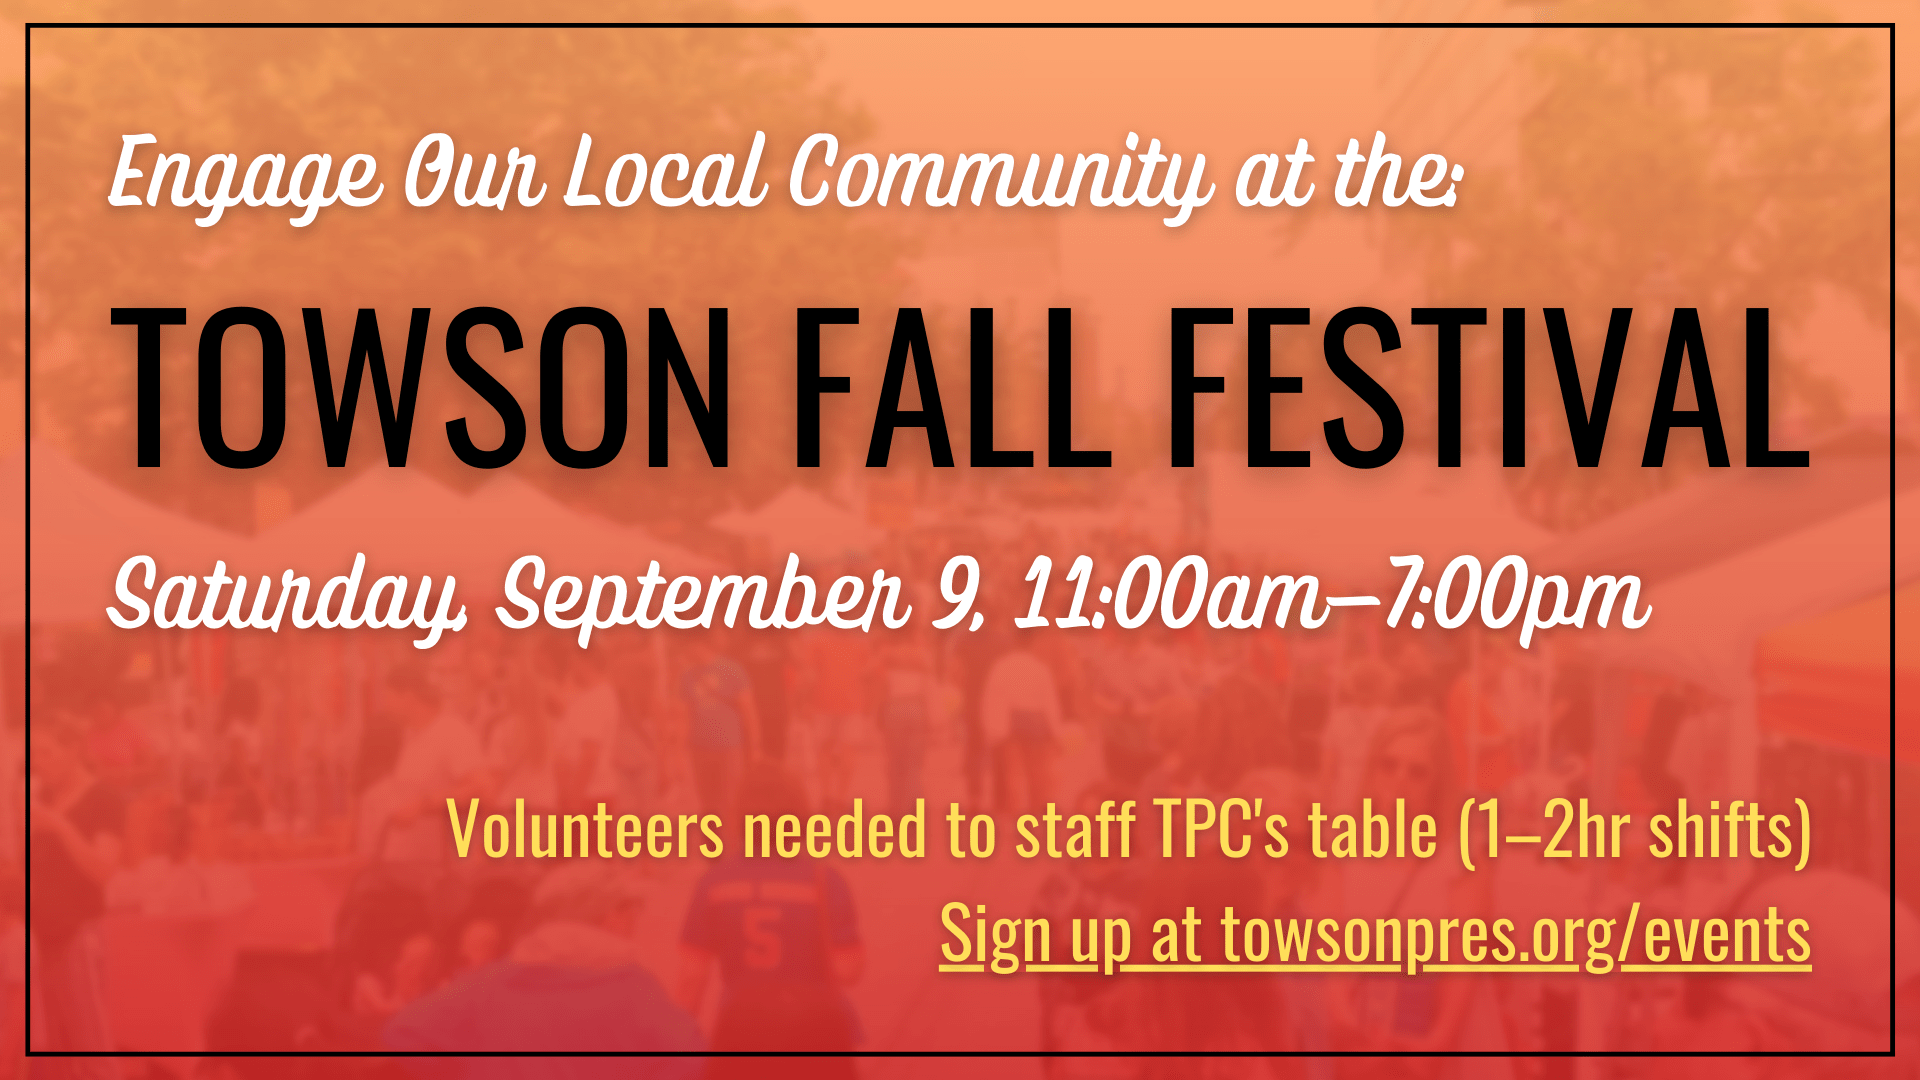 Graphic that says: "Engage Our Local Community at the: Towson Fall Festival. Saturday, September 9, 11:00am-7:00pm. Volunteers needed to staff TPC's table (1-2hr shifts) Sign up at towsonpres.org/events."